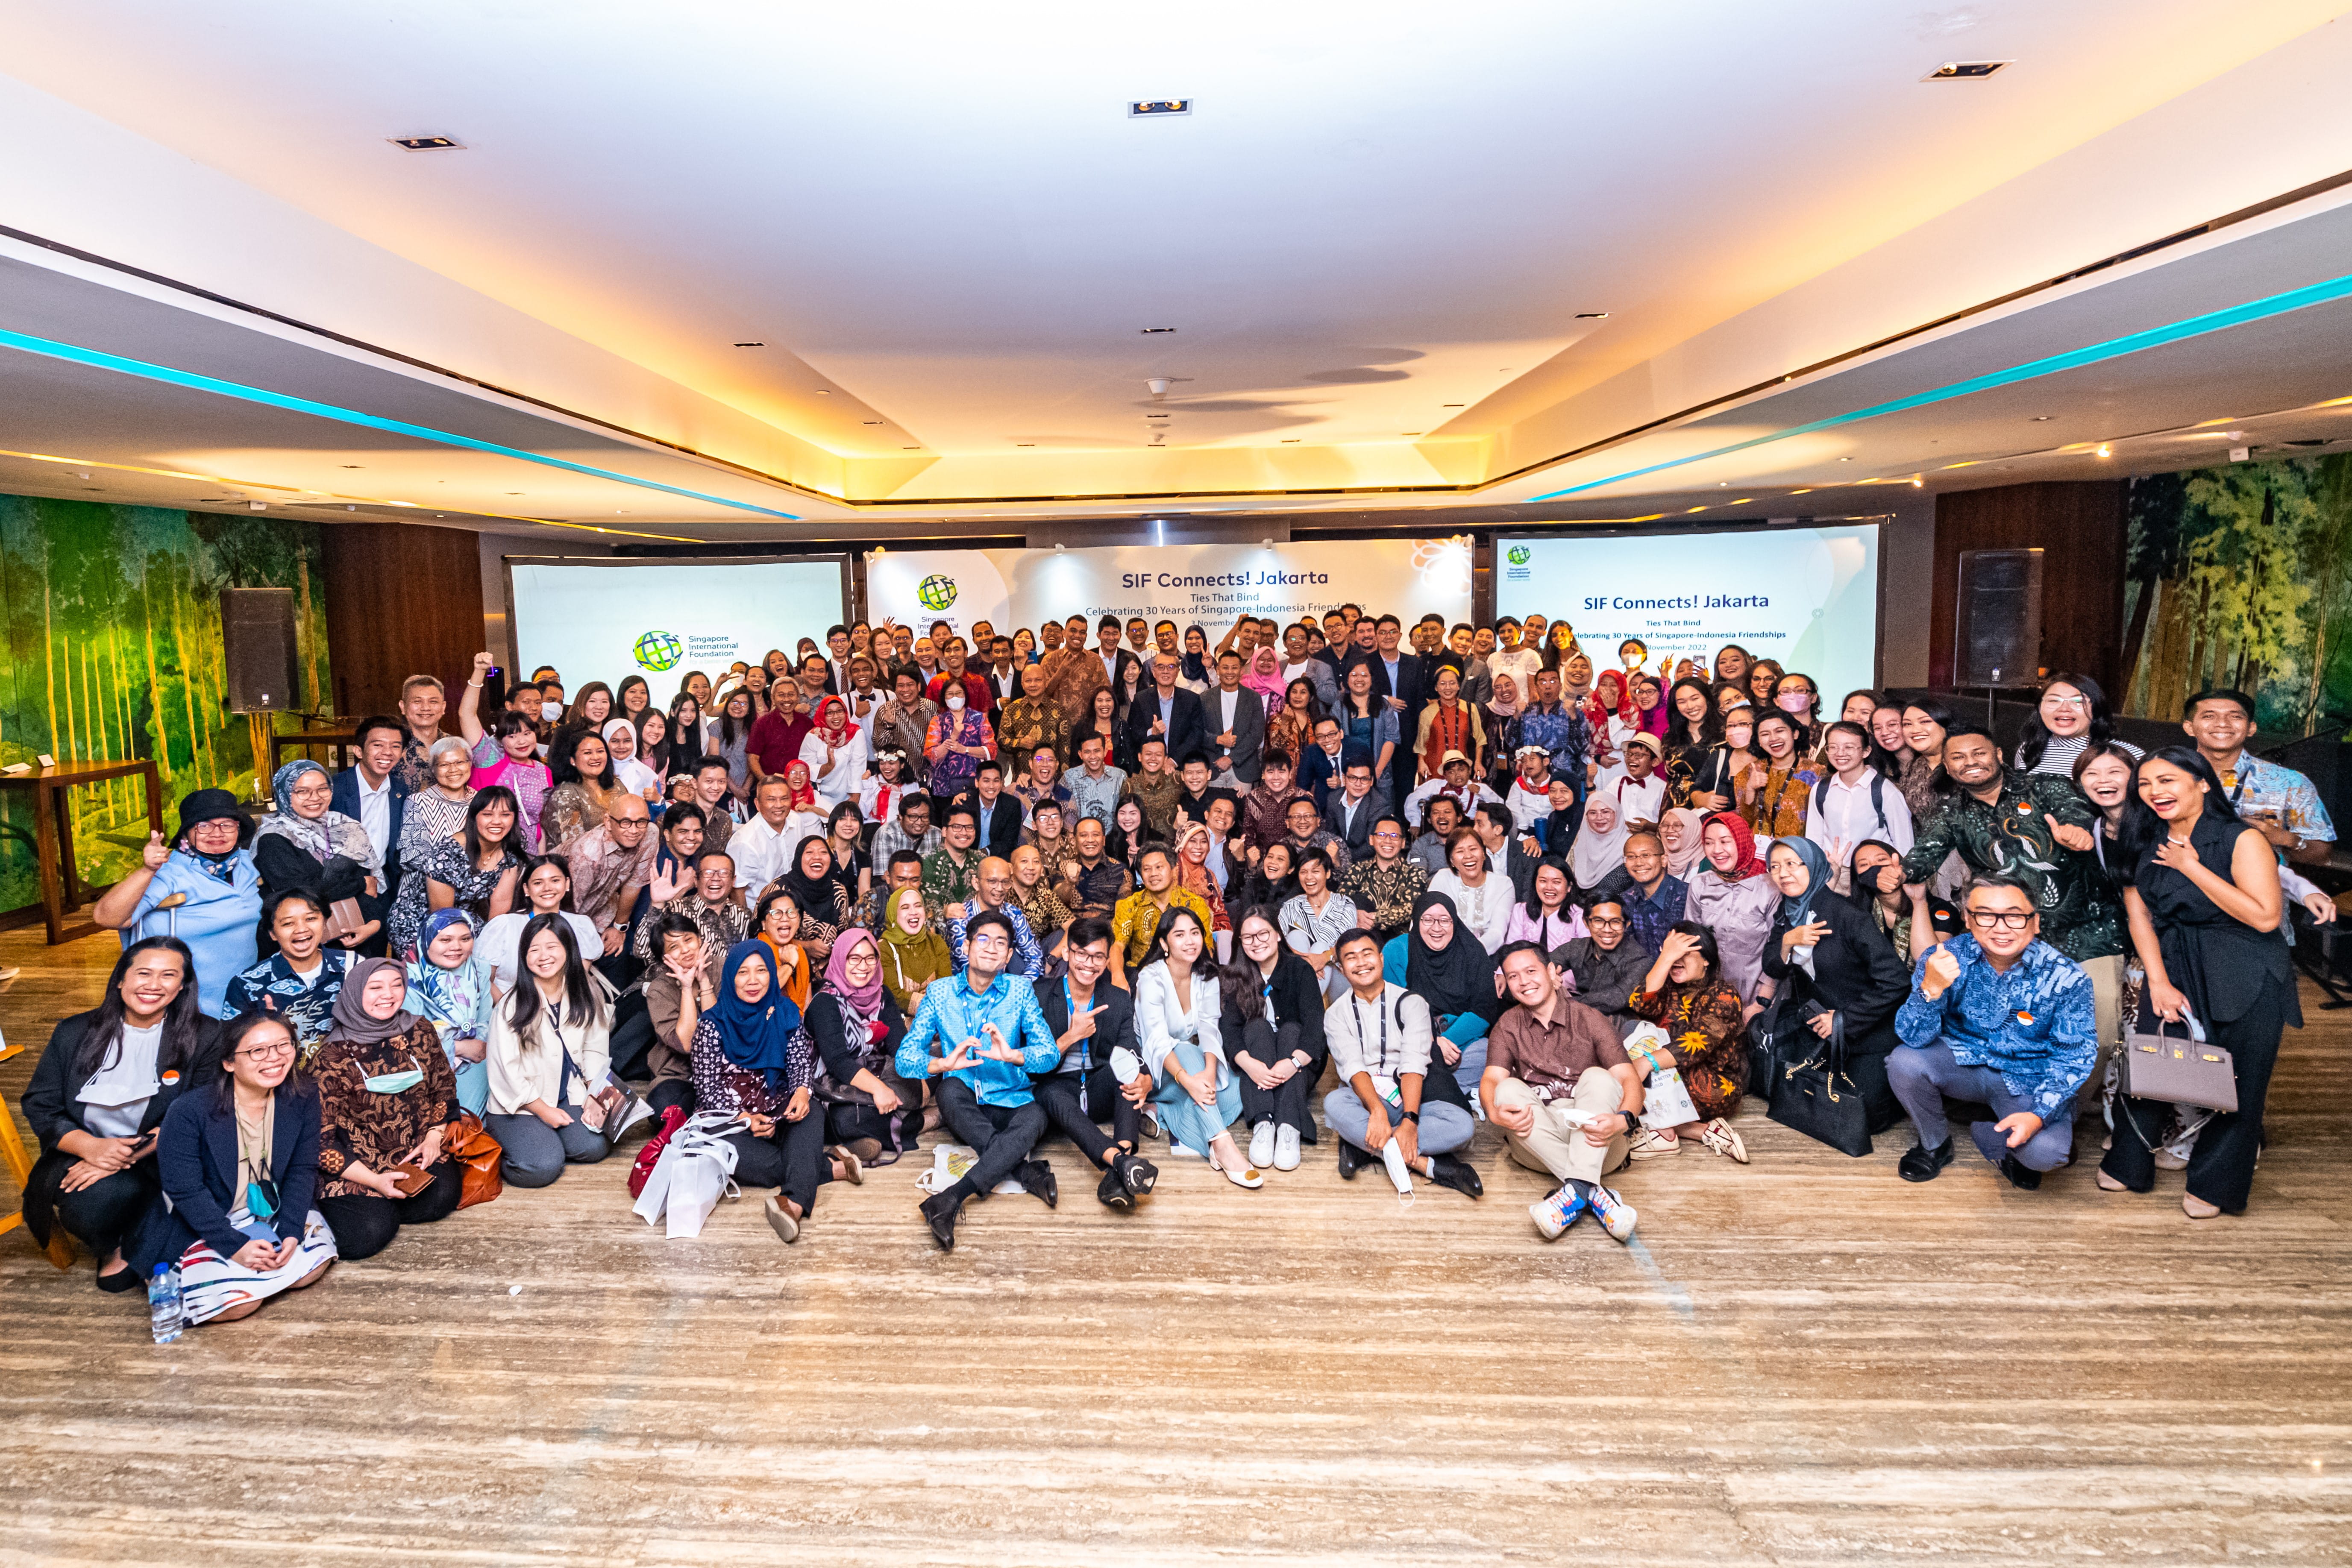 SIF Connects! Jakarta Brings in New Collaboration Opportunities at Homecoming